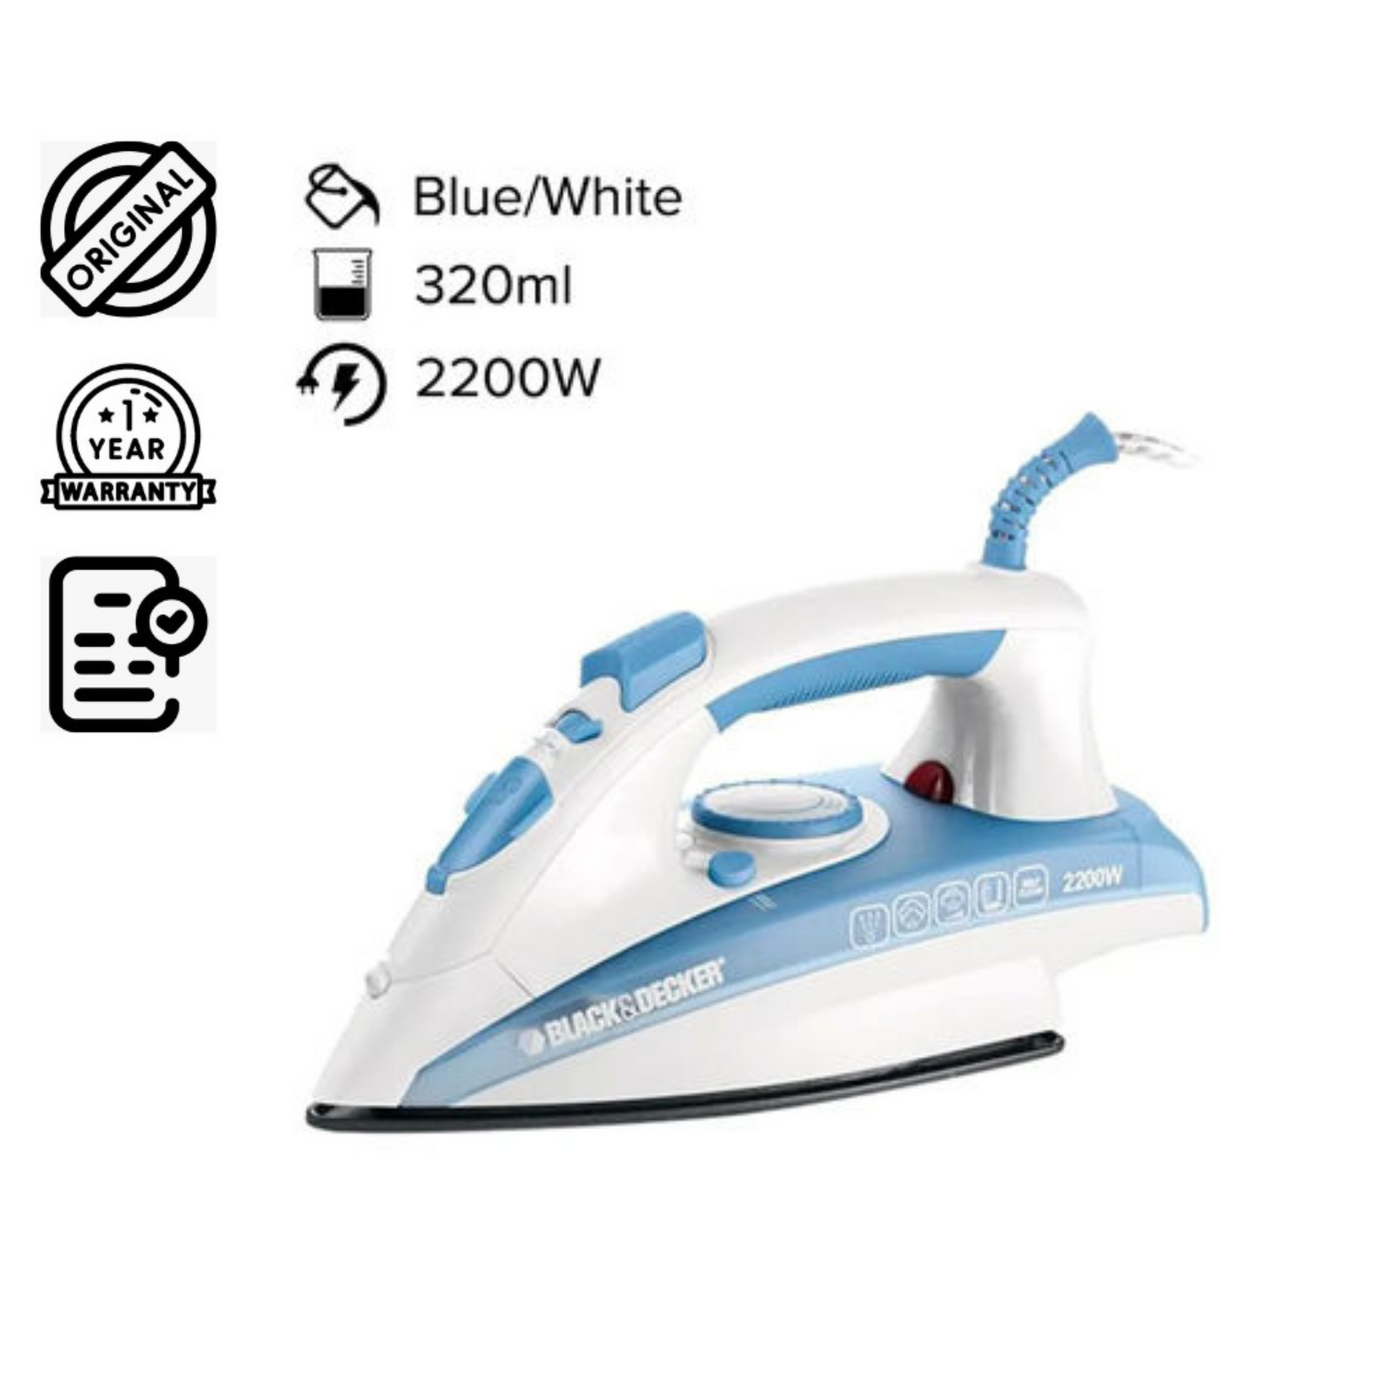 2200w Steam Iron With Non-stick Soleplate And Spray Function